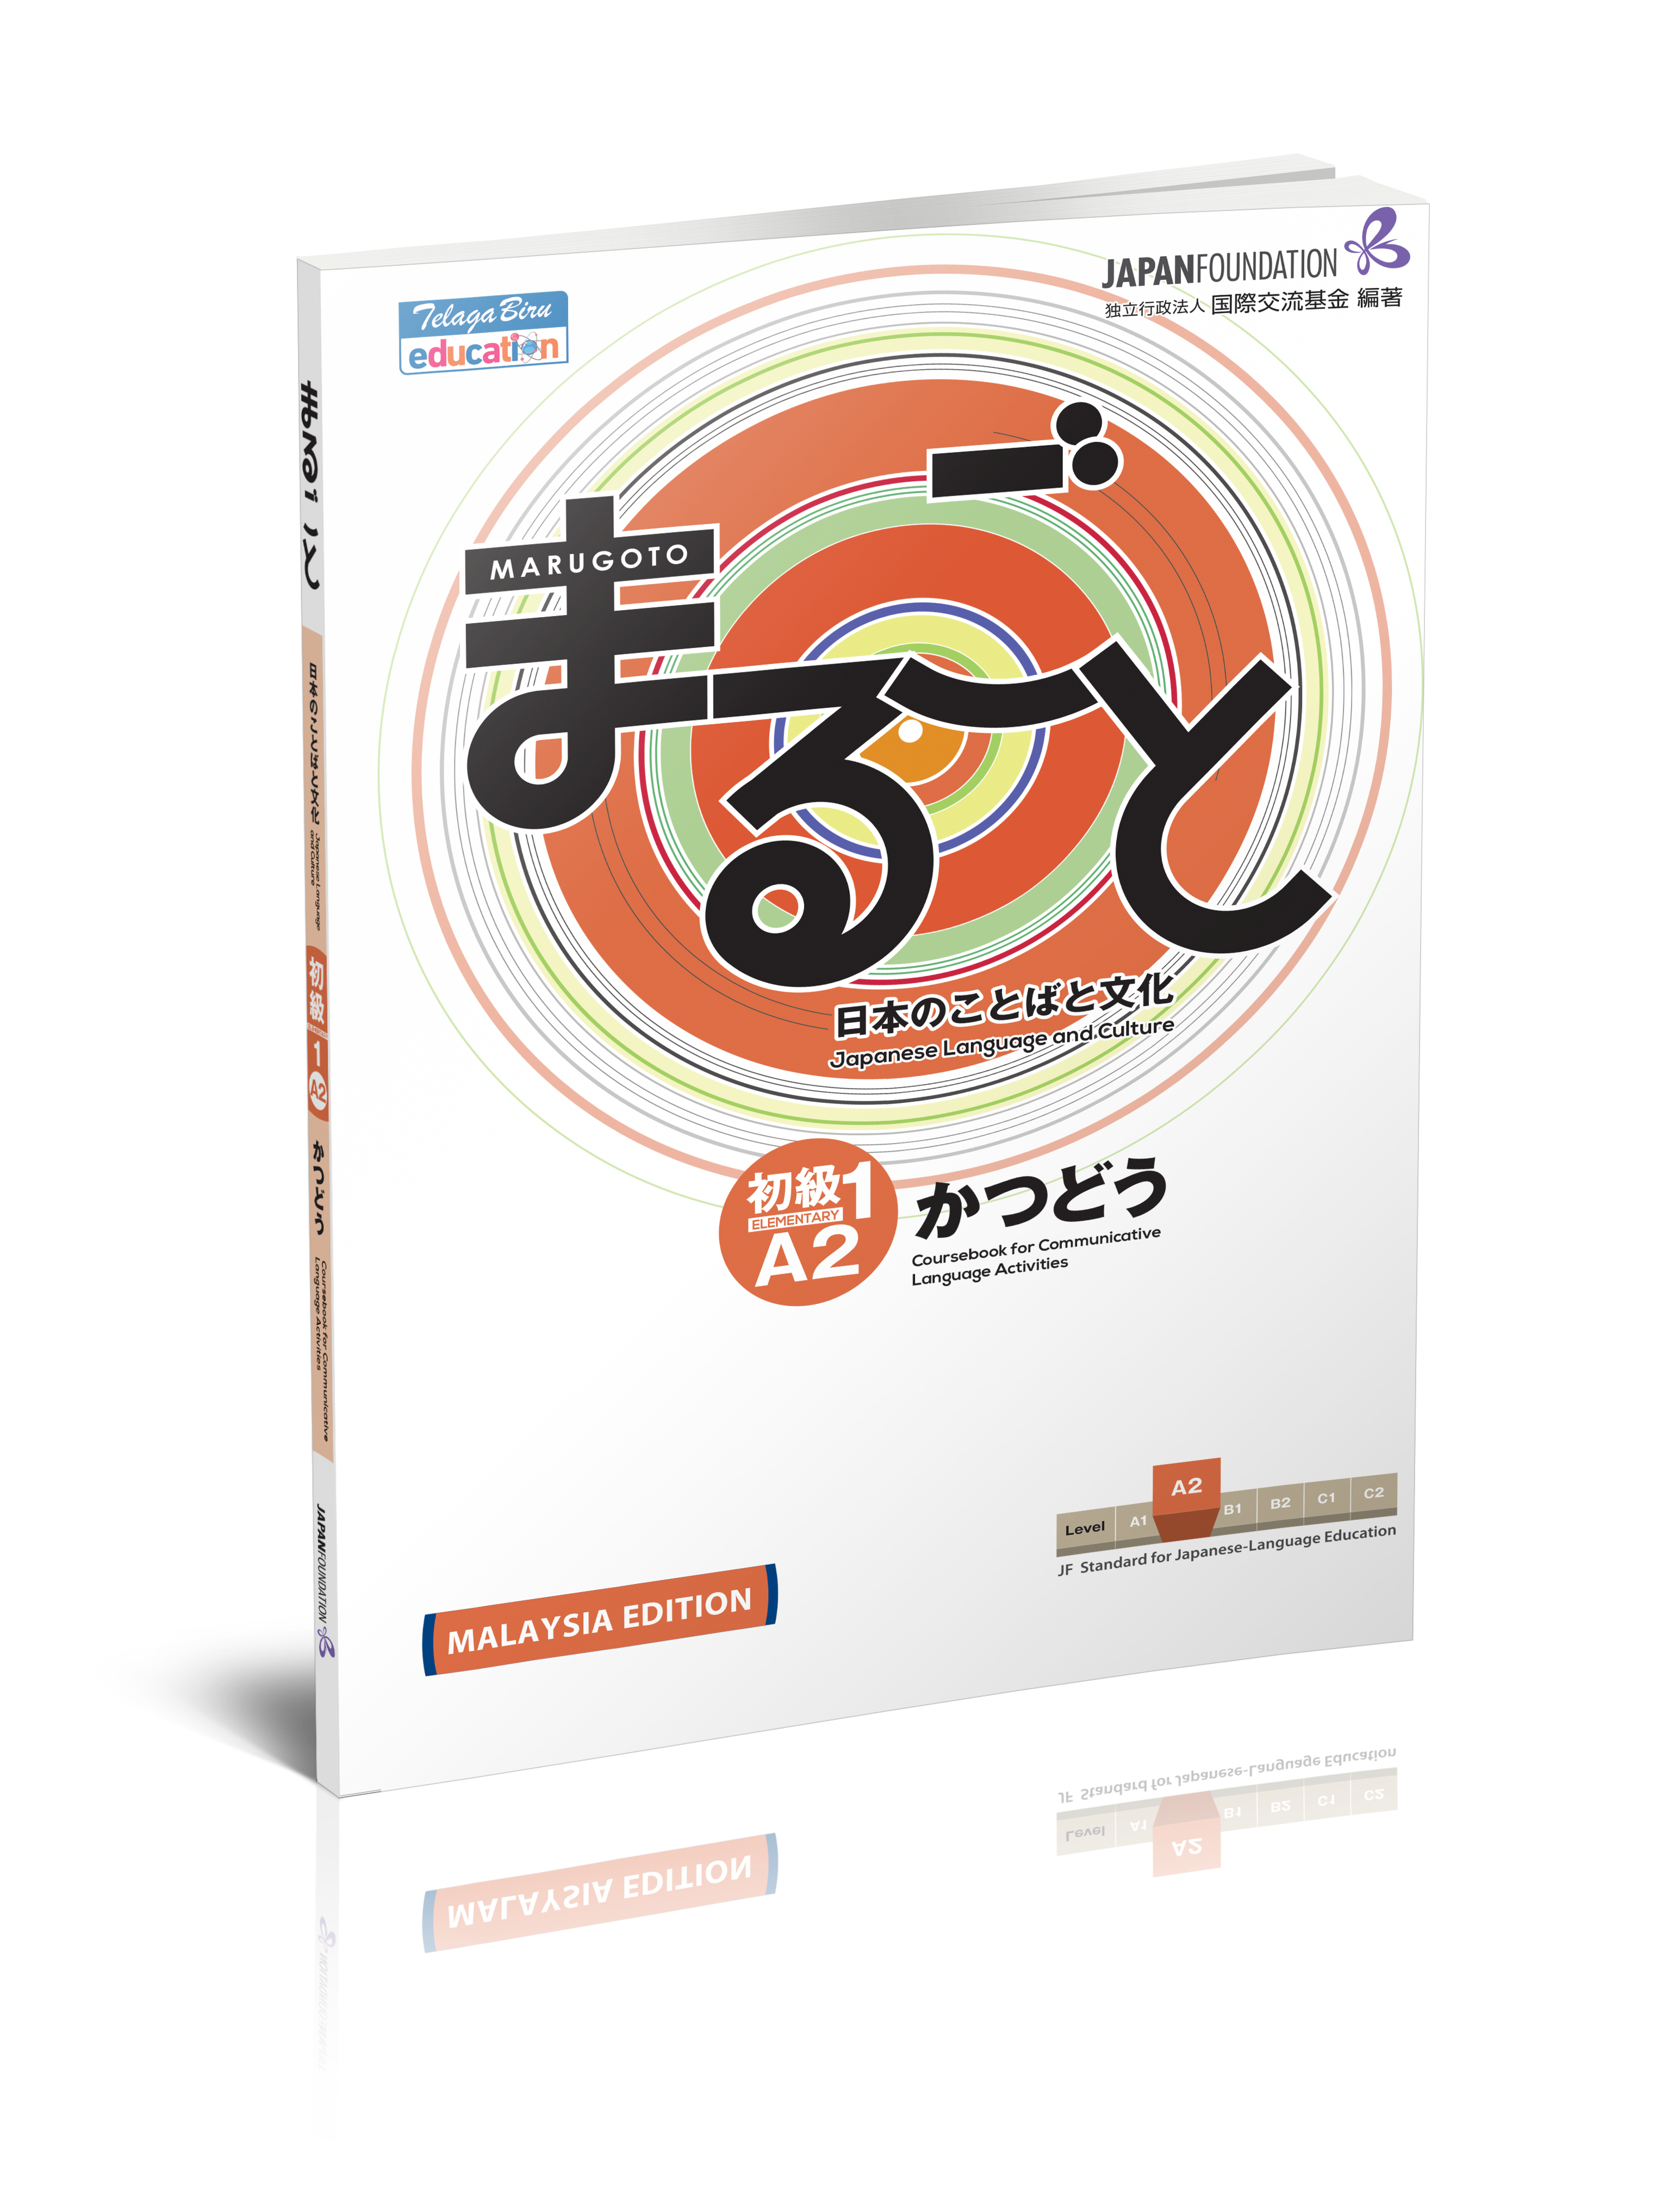 Marugoto: Japanese Language and Culture Elementary A2 Coursebook for Comunnicative Language Activities (White) (Katsudoo) - (TBBS1113)